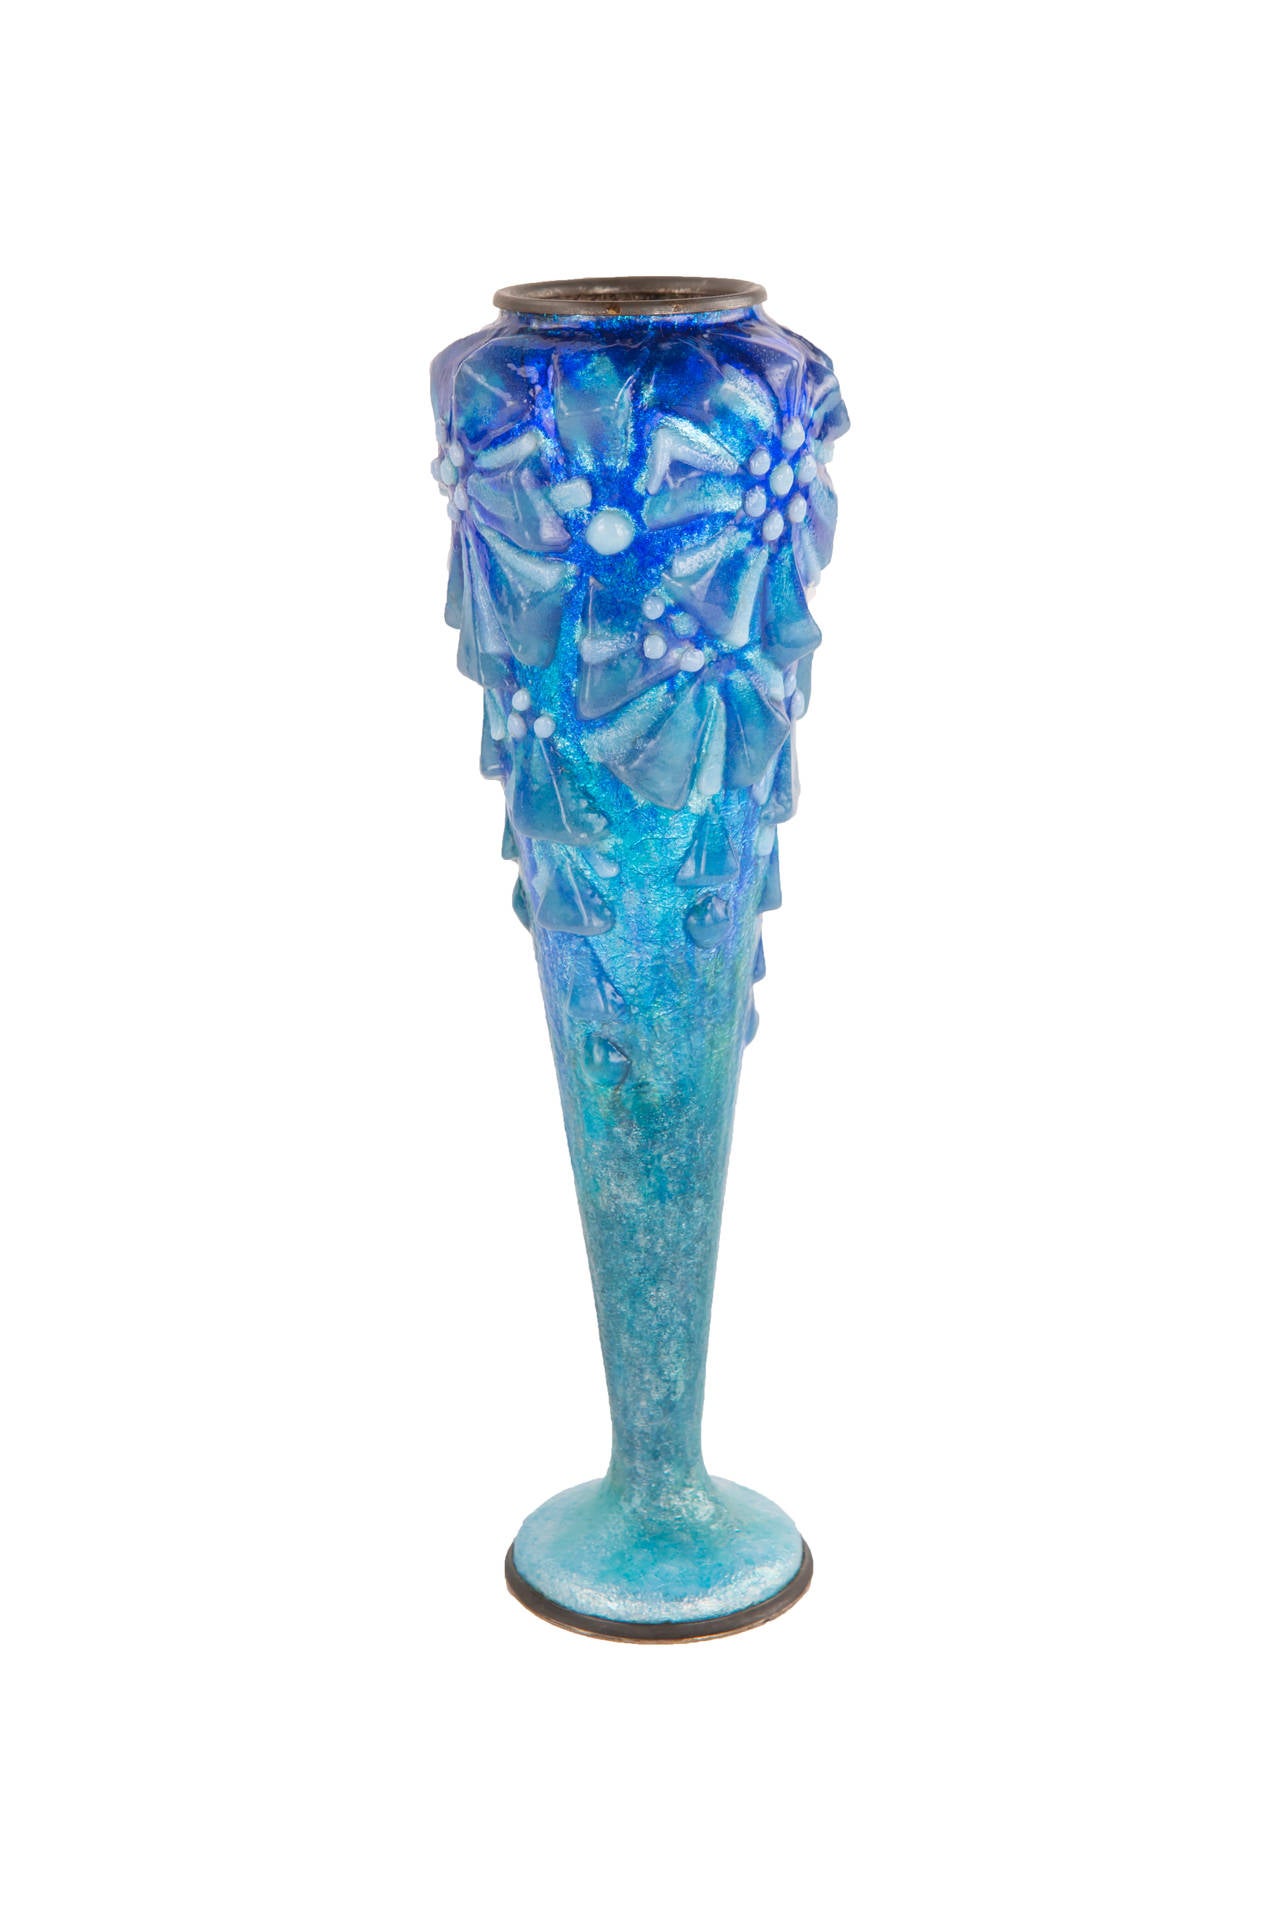 A French Art Deco enamel laid on copper Geometric Floral vase by, Camille Fauré decorated with raised enamel geometric shapes in colors of white and various blues. The vase is signed, 